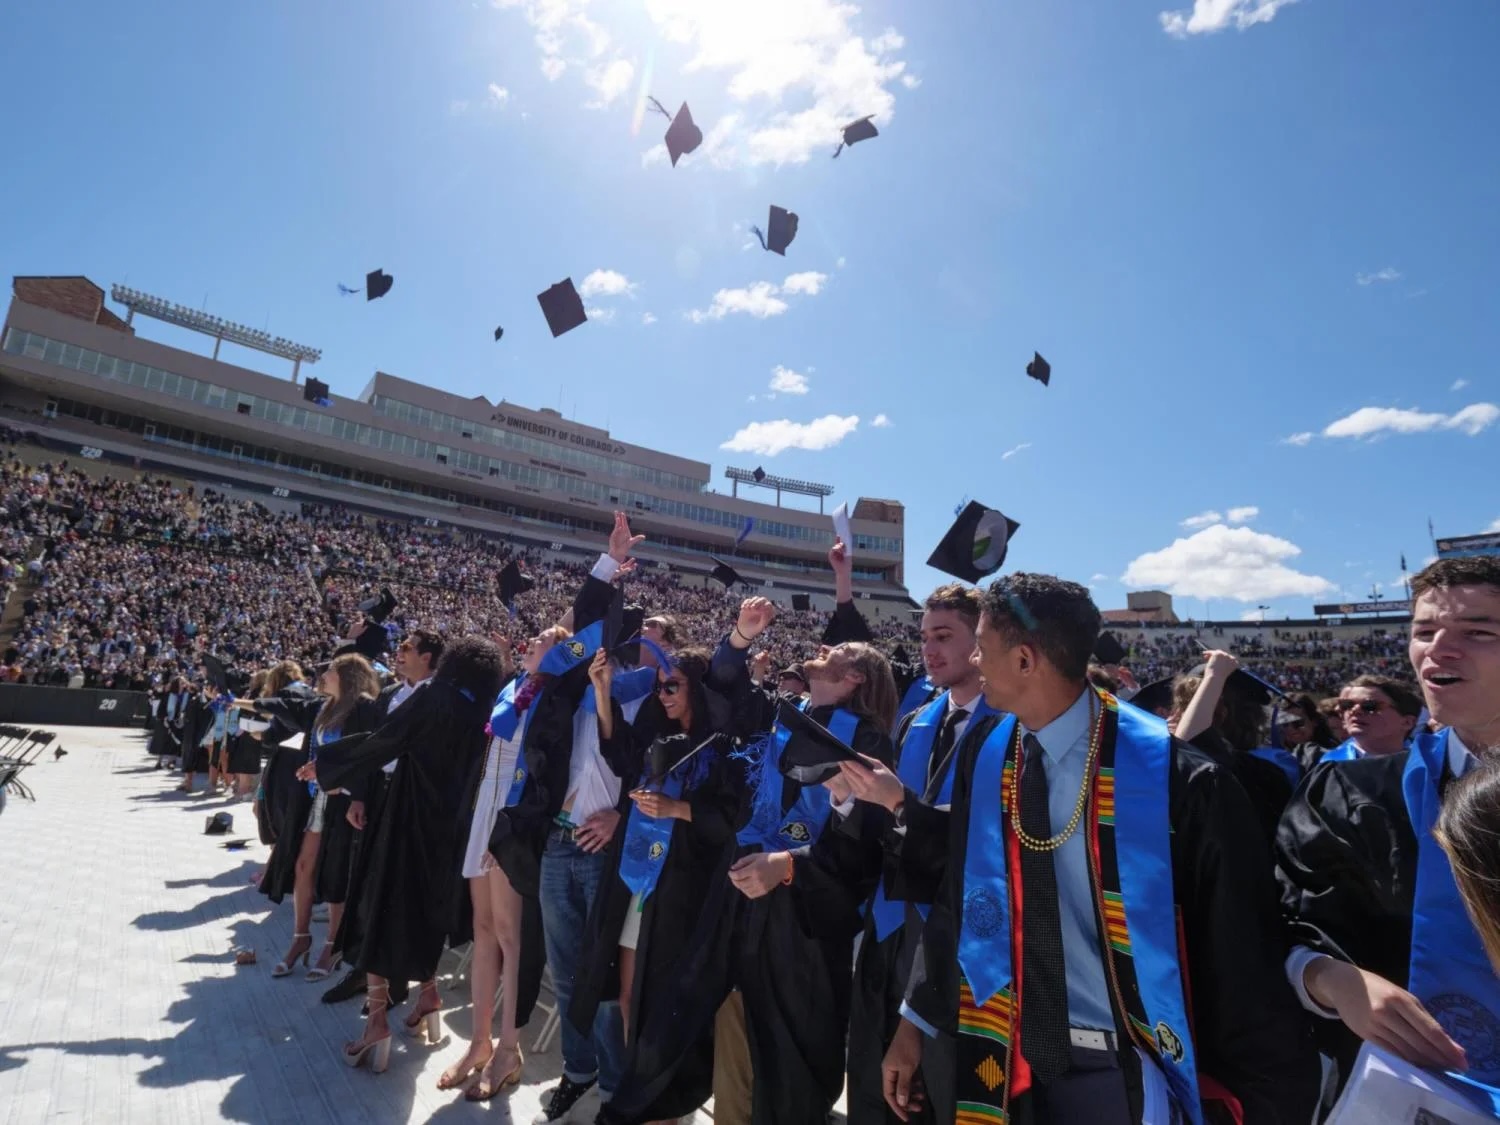 Students tossing their graduation caps during the University of Colorado commencement ceremony.